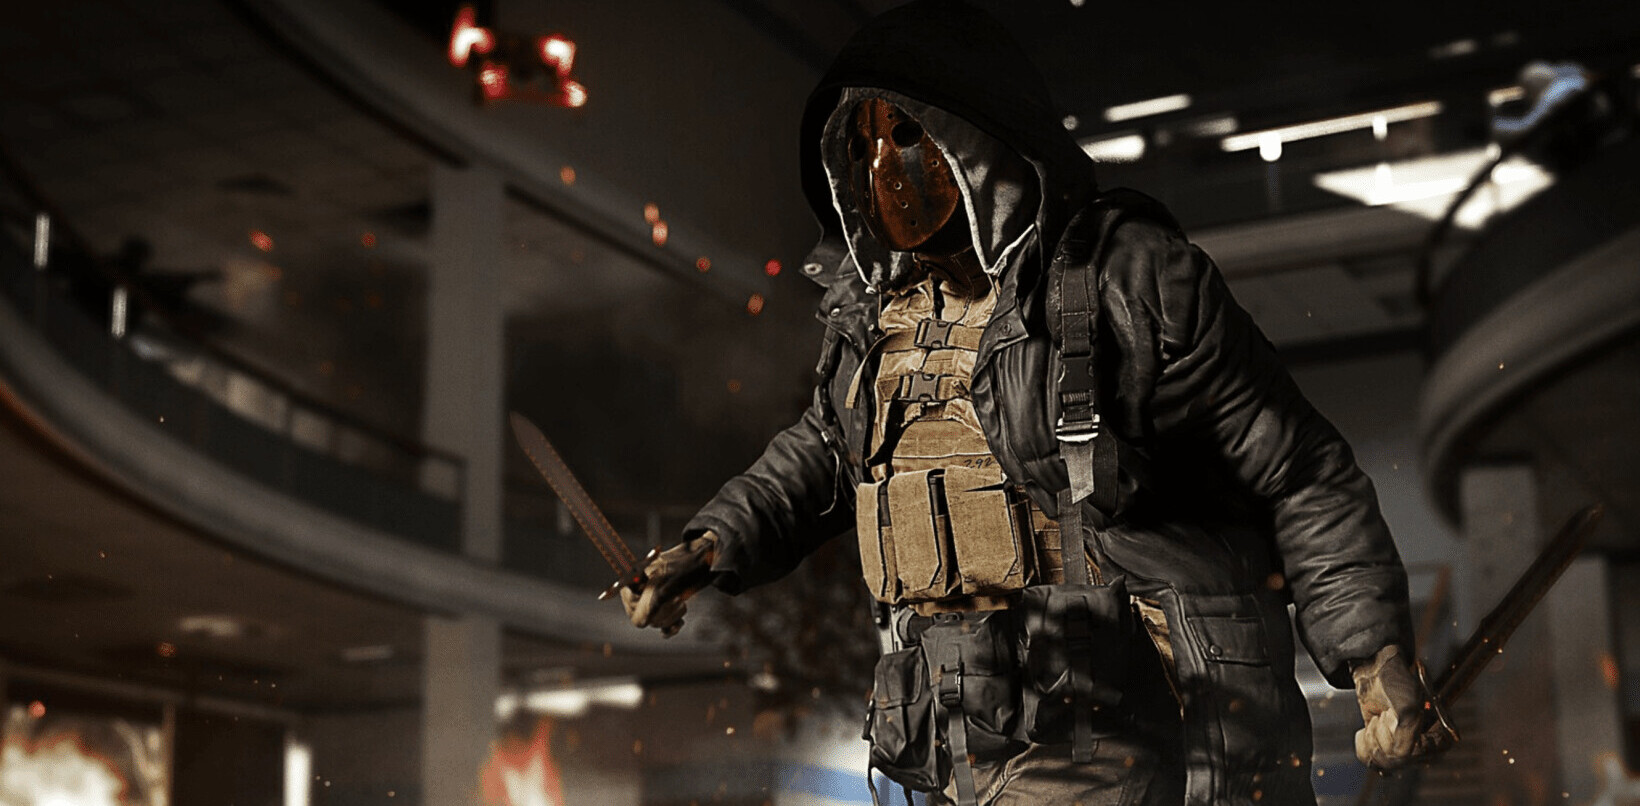 PSA: Call of Duty’s Season 6 patch is 57GB — better start downloading it now